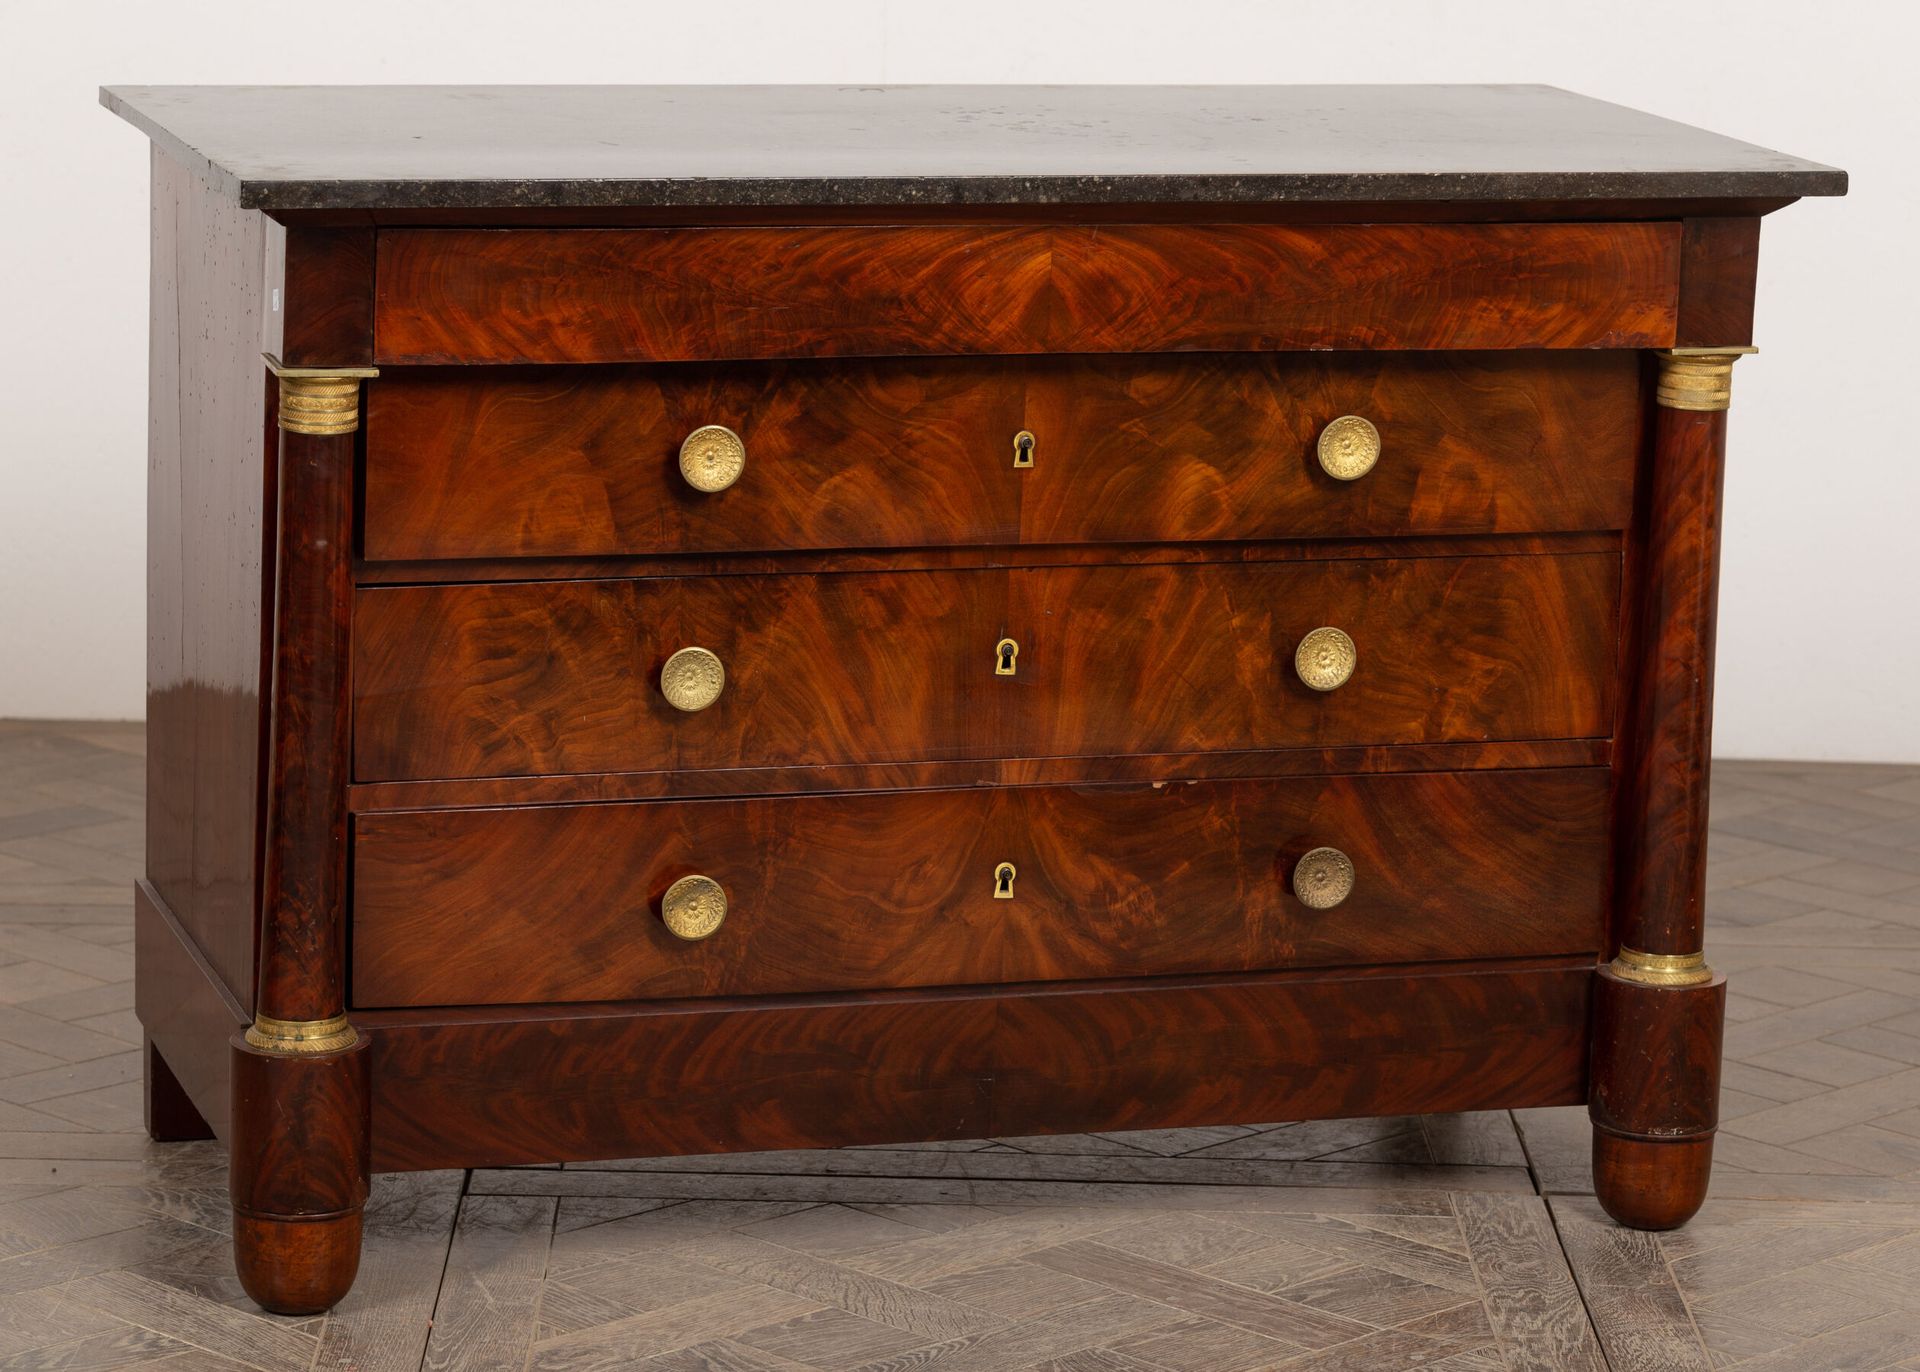 Null Mahogany and mahogany veneer chest of drawers with ormolu ornamentation.
It&hellip;